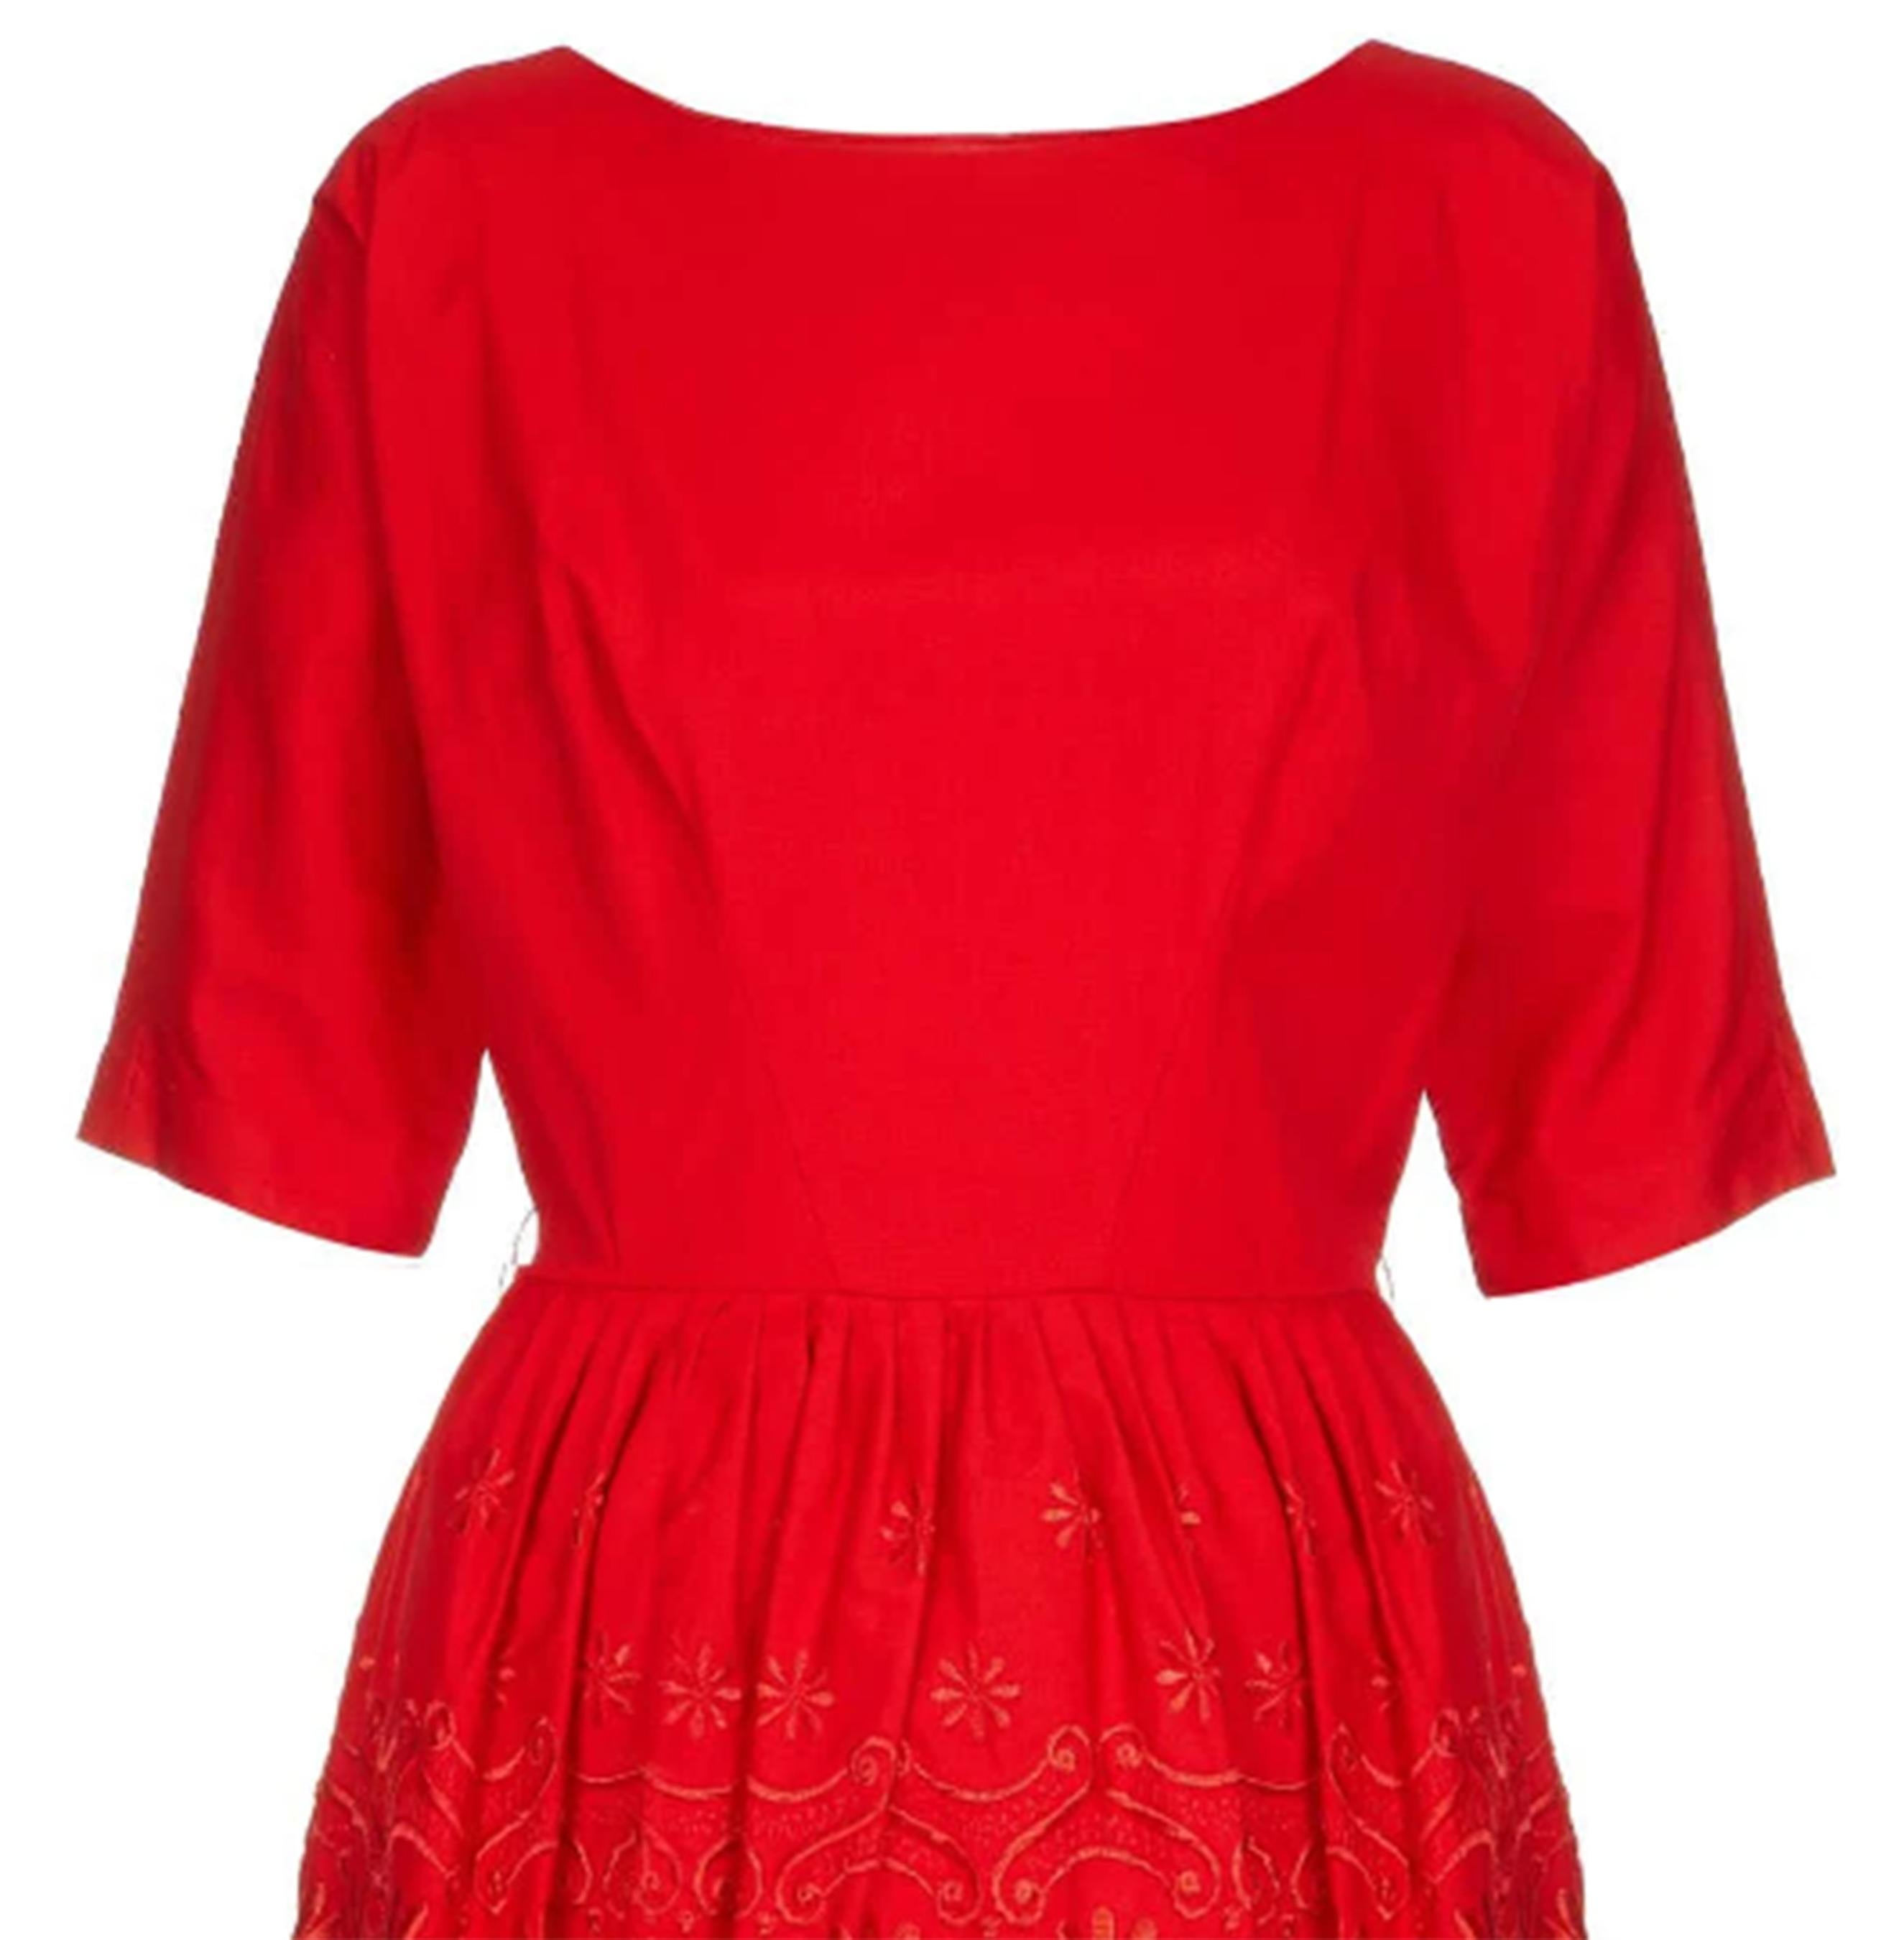 Women's 1950s Red Cotton Dress with Embroidered Peplum For Sale